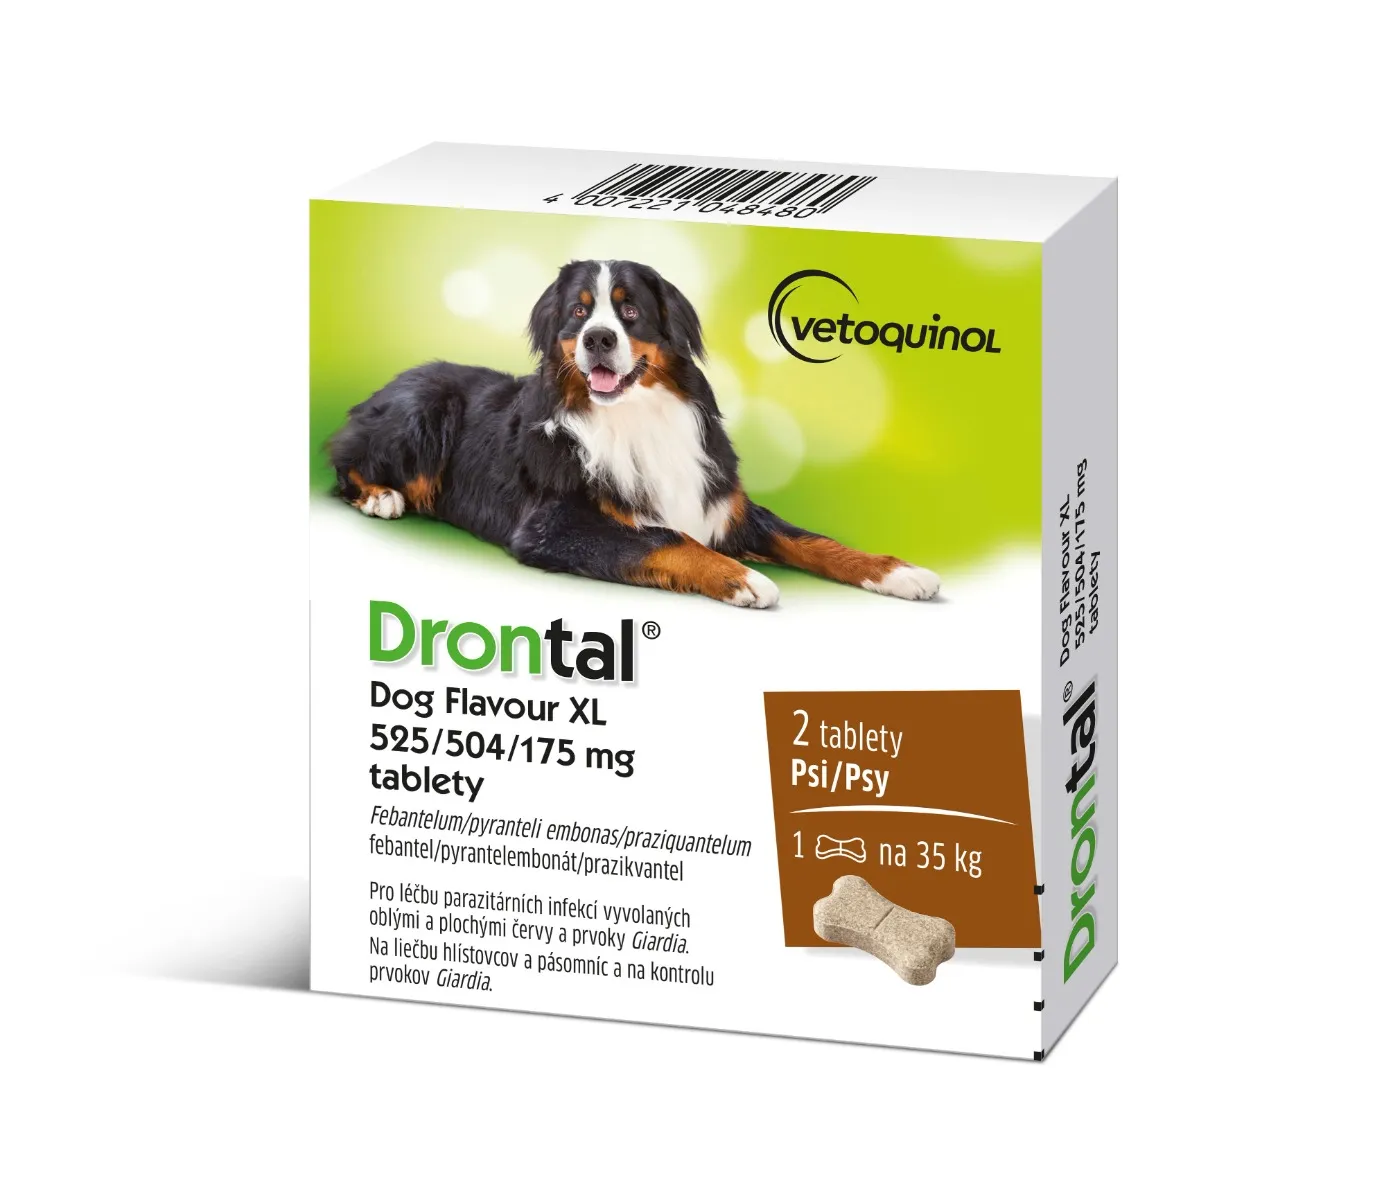 Drontal Dog Flavour XL 525/504/175 mg 2 tablety